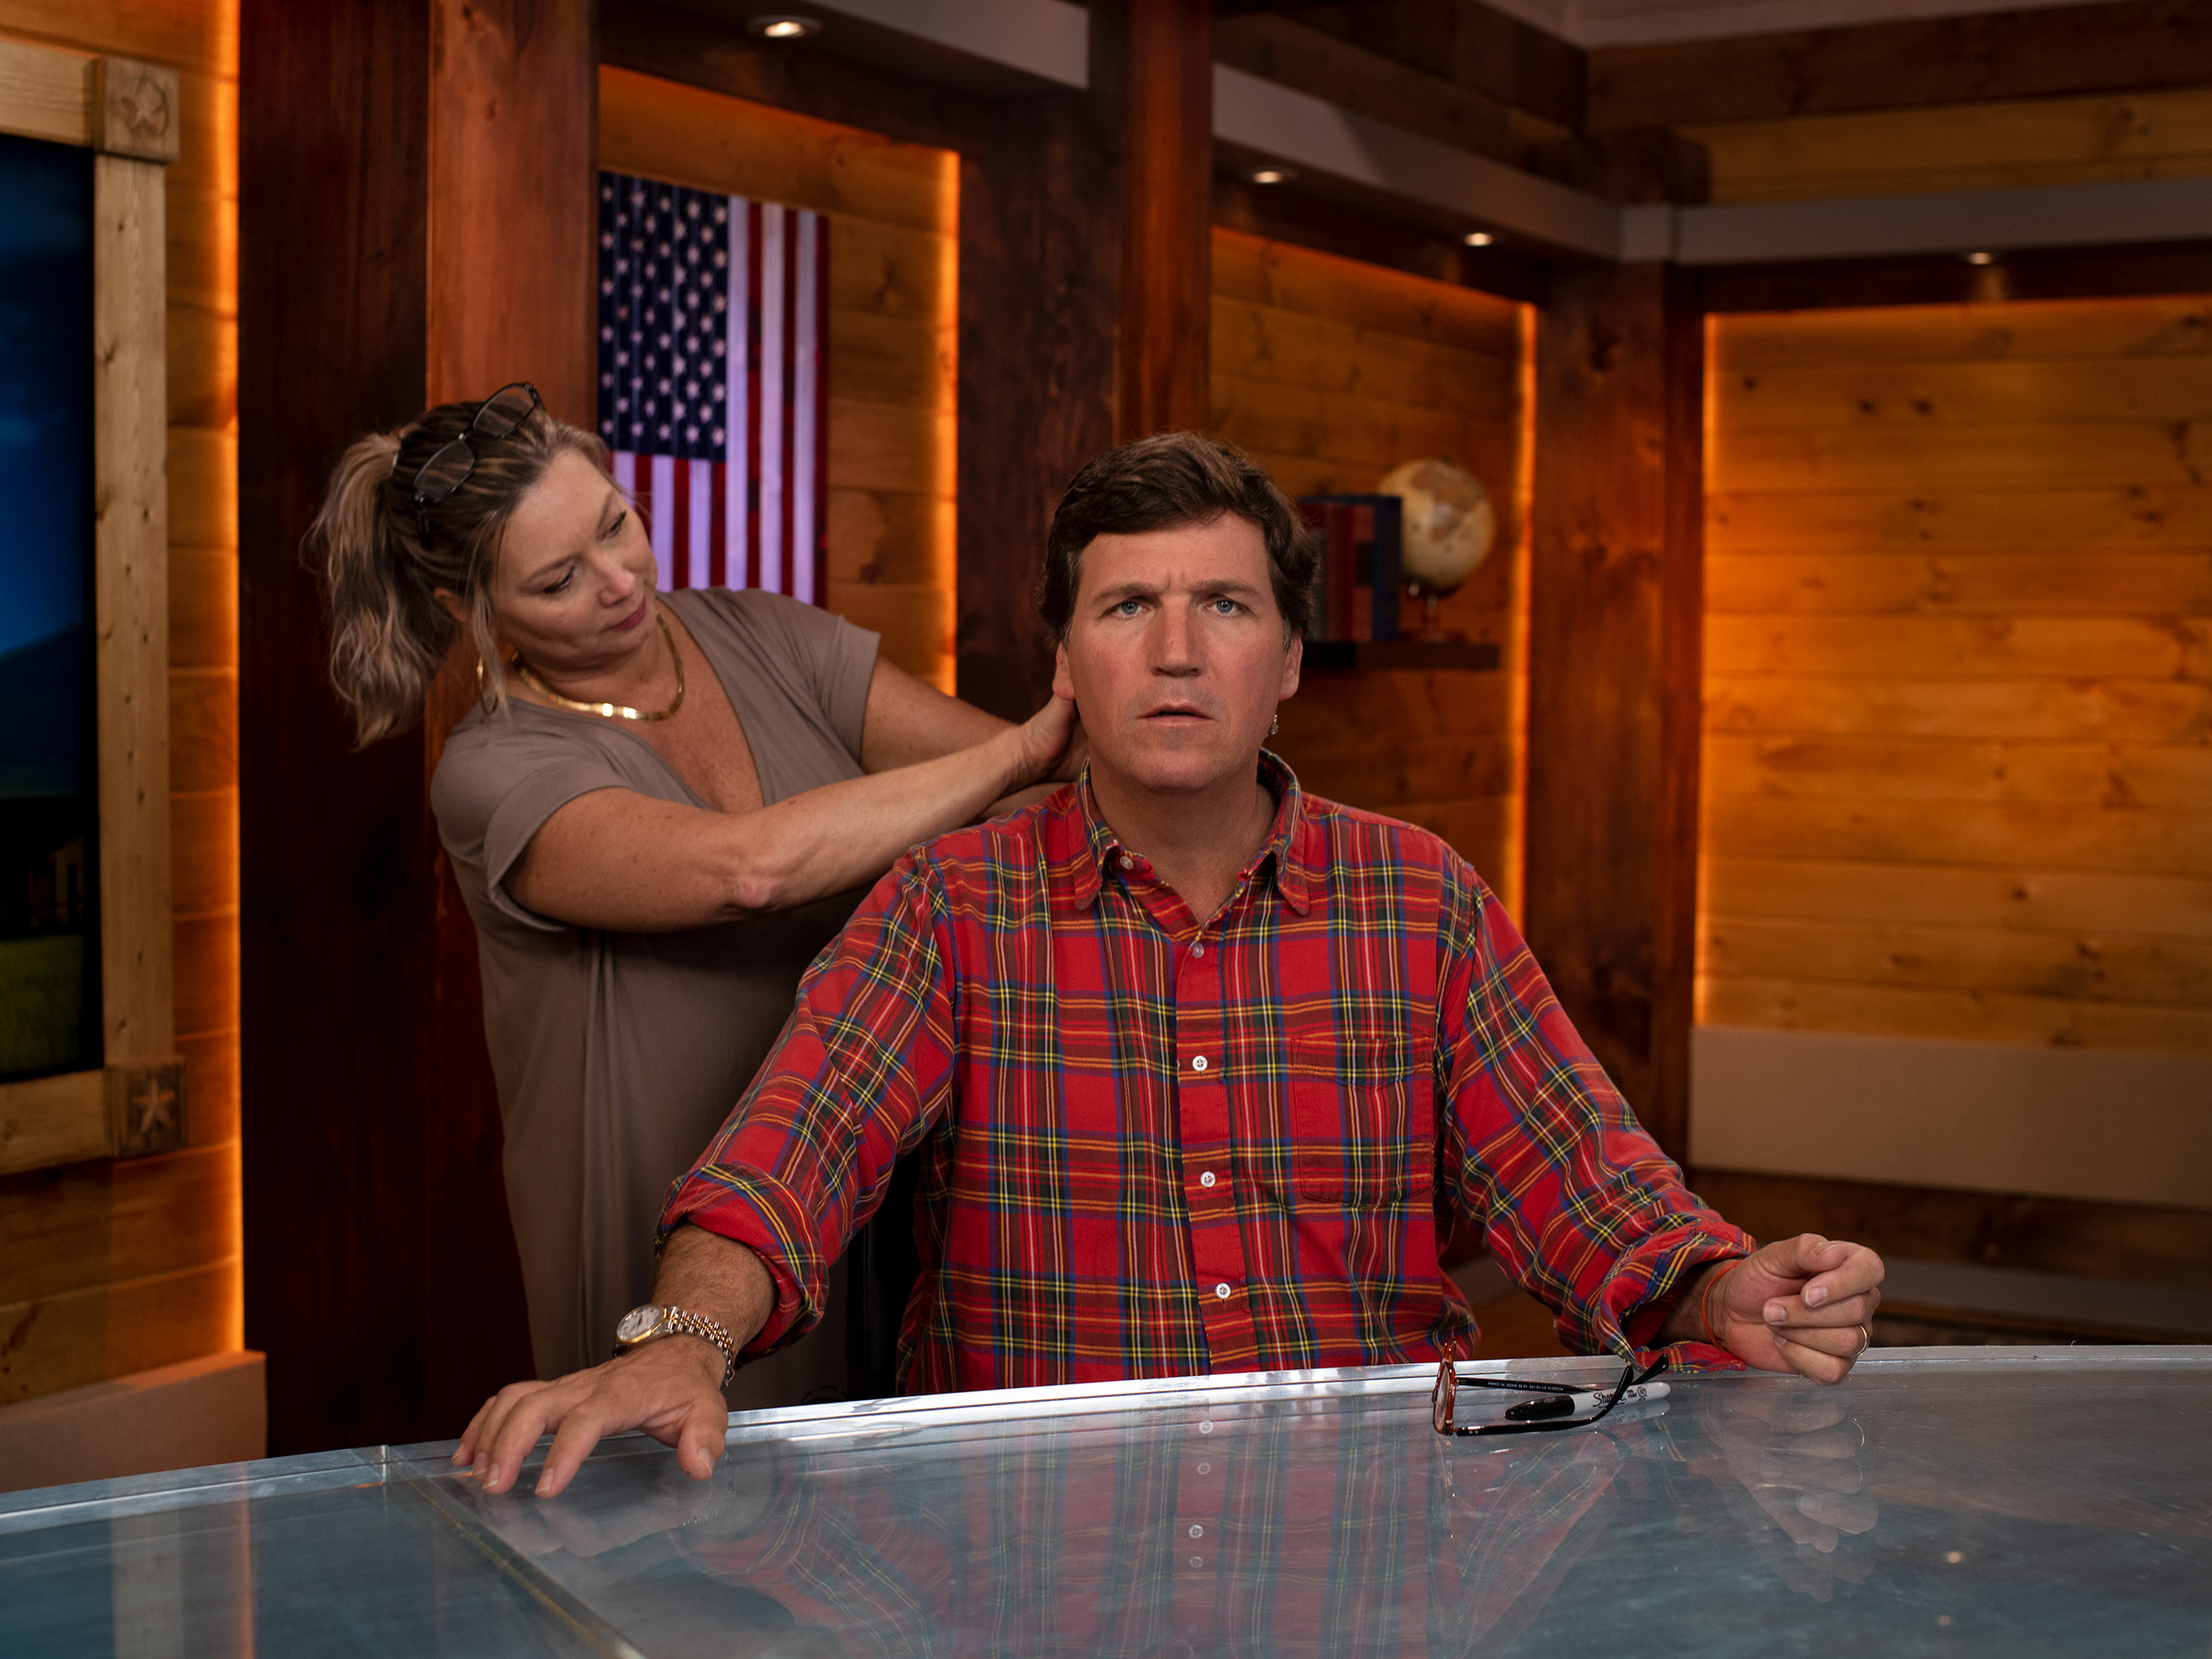 On the set of his daytime show, Tucker Carlson Today, which launched in May (Gillian Laub for TIME)